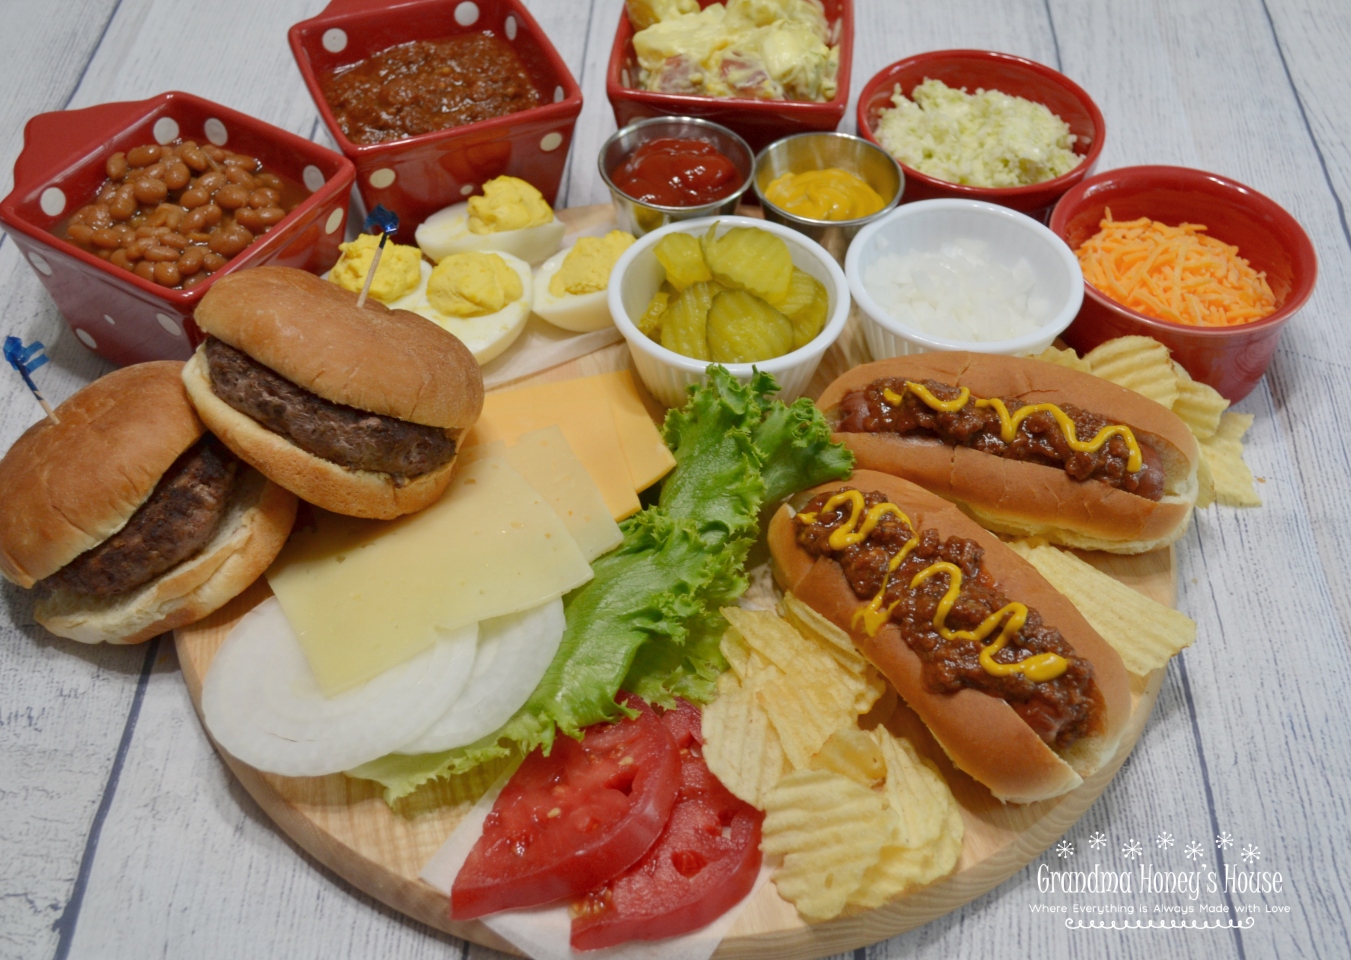 This cookout board for 2 includes burgers, hot dogs and all of the sides served at any summer get together.